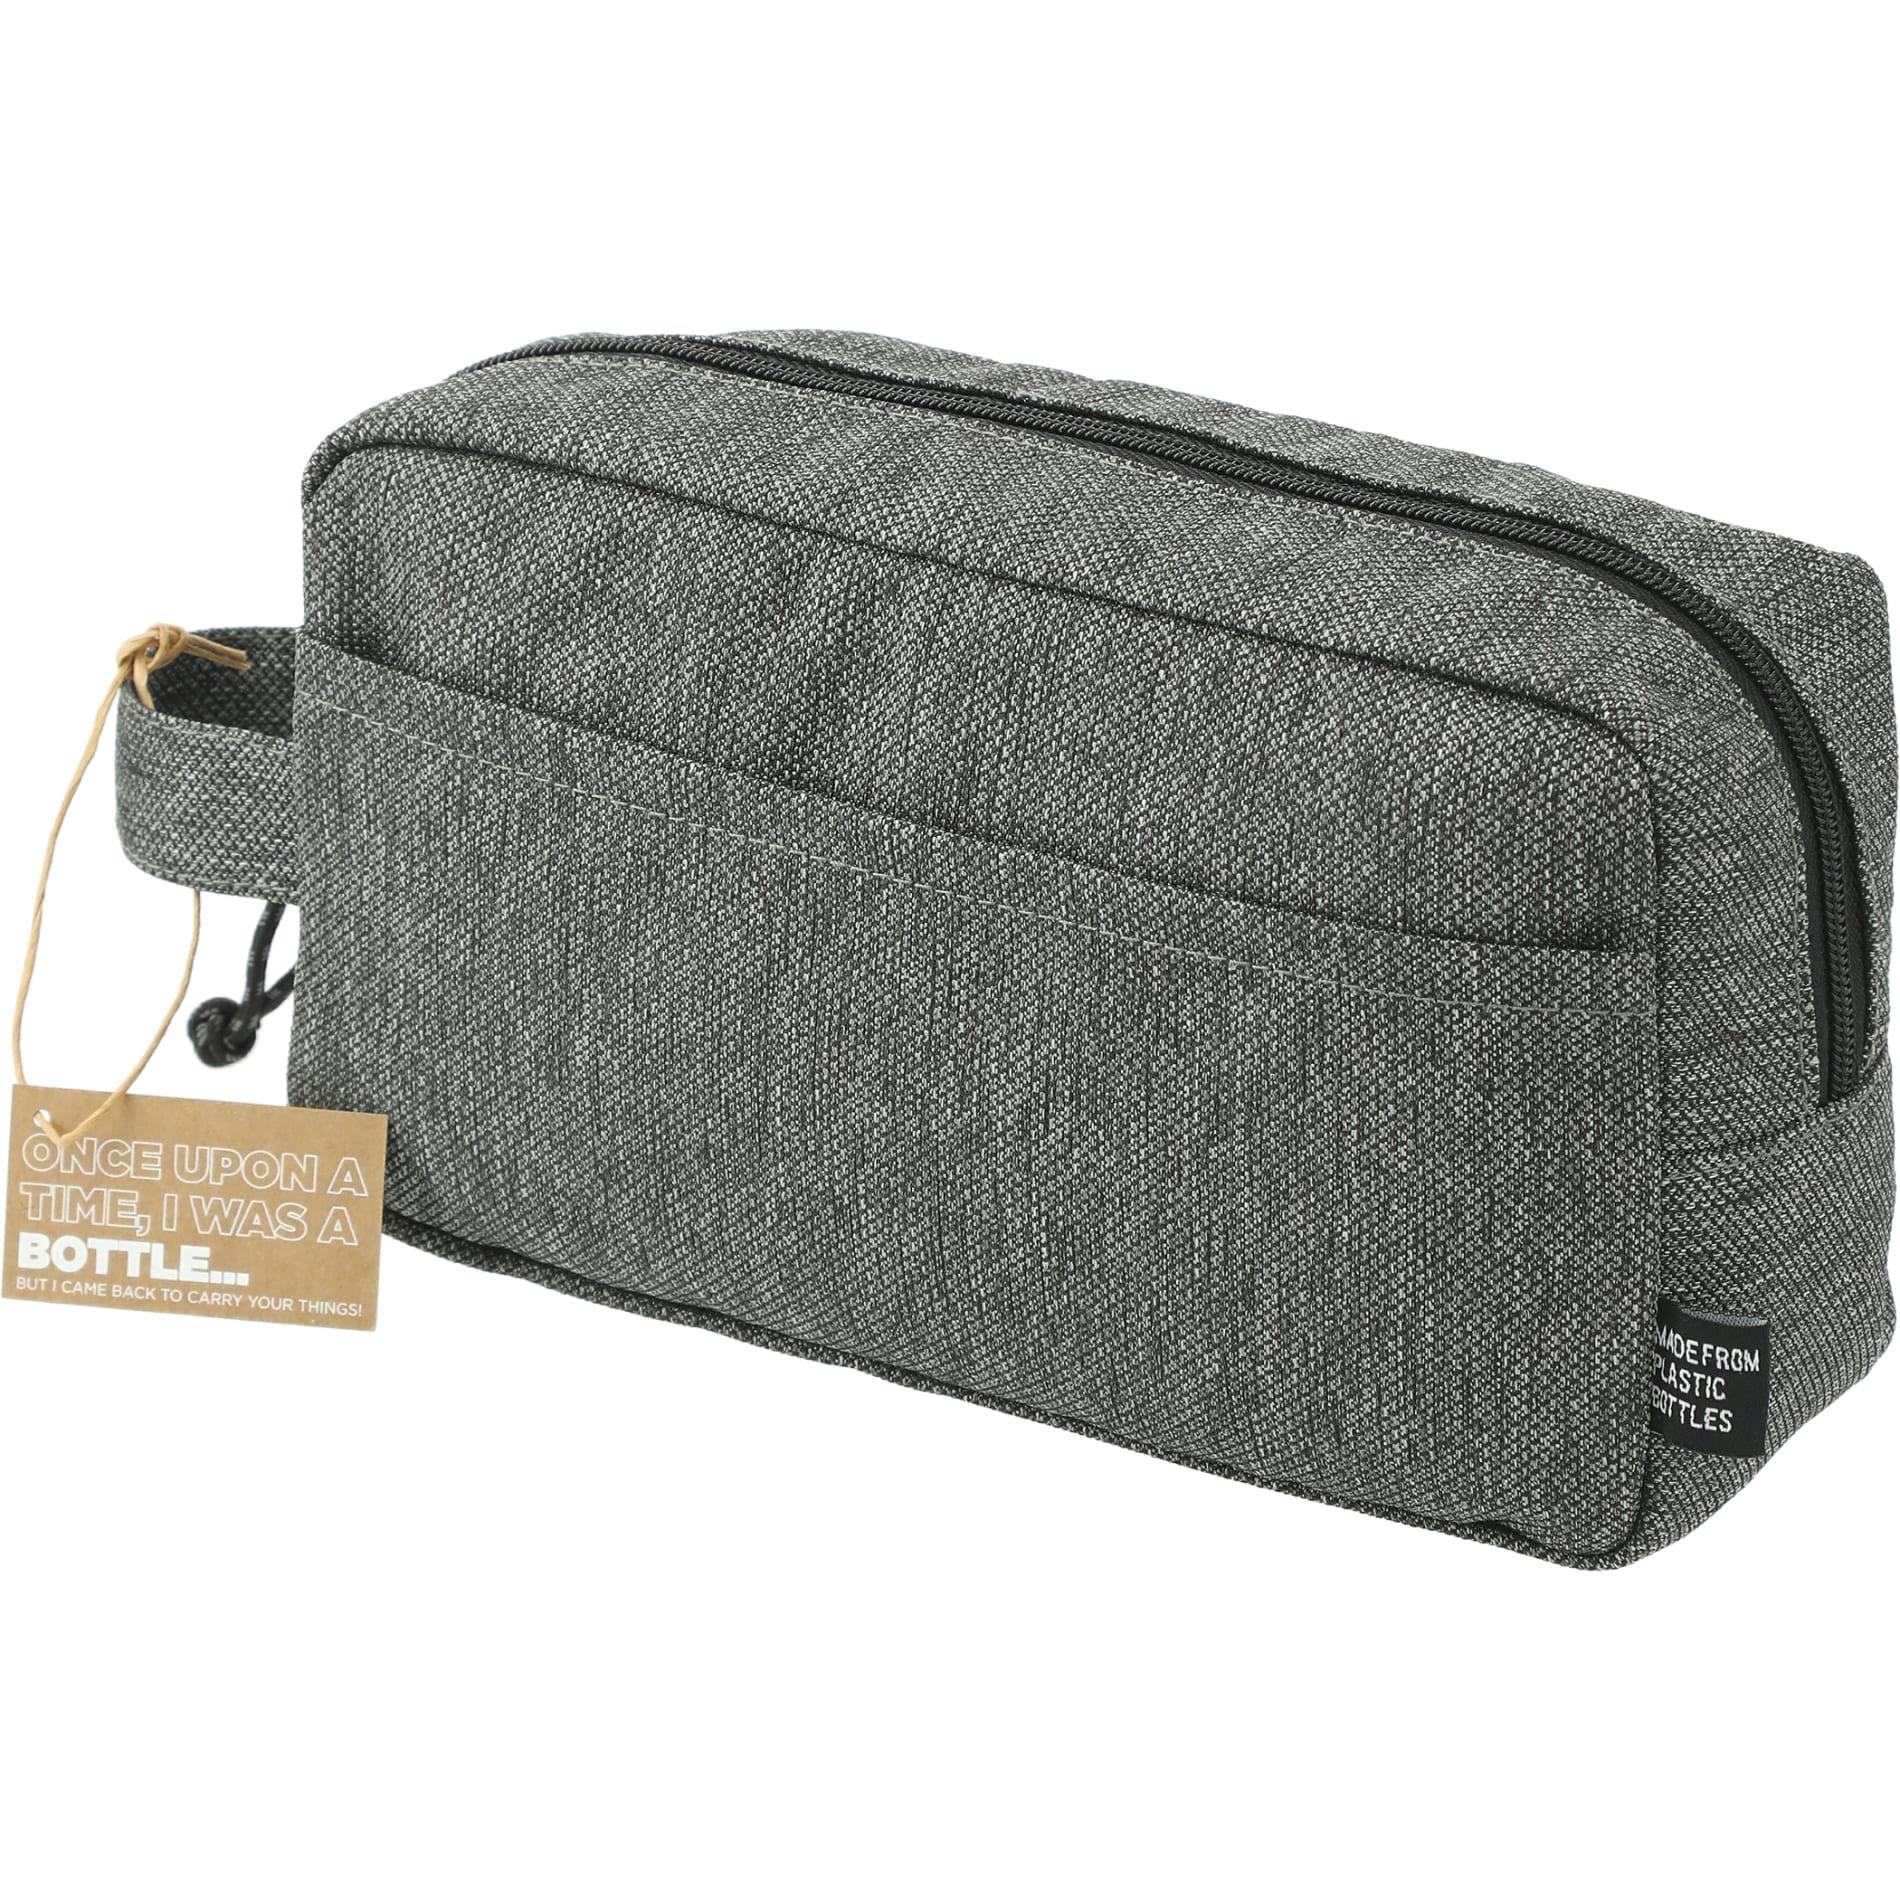 Vila Recycled Dopp Kit Pouch - additional Image 1